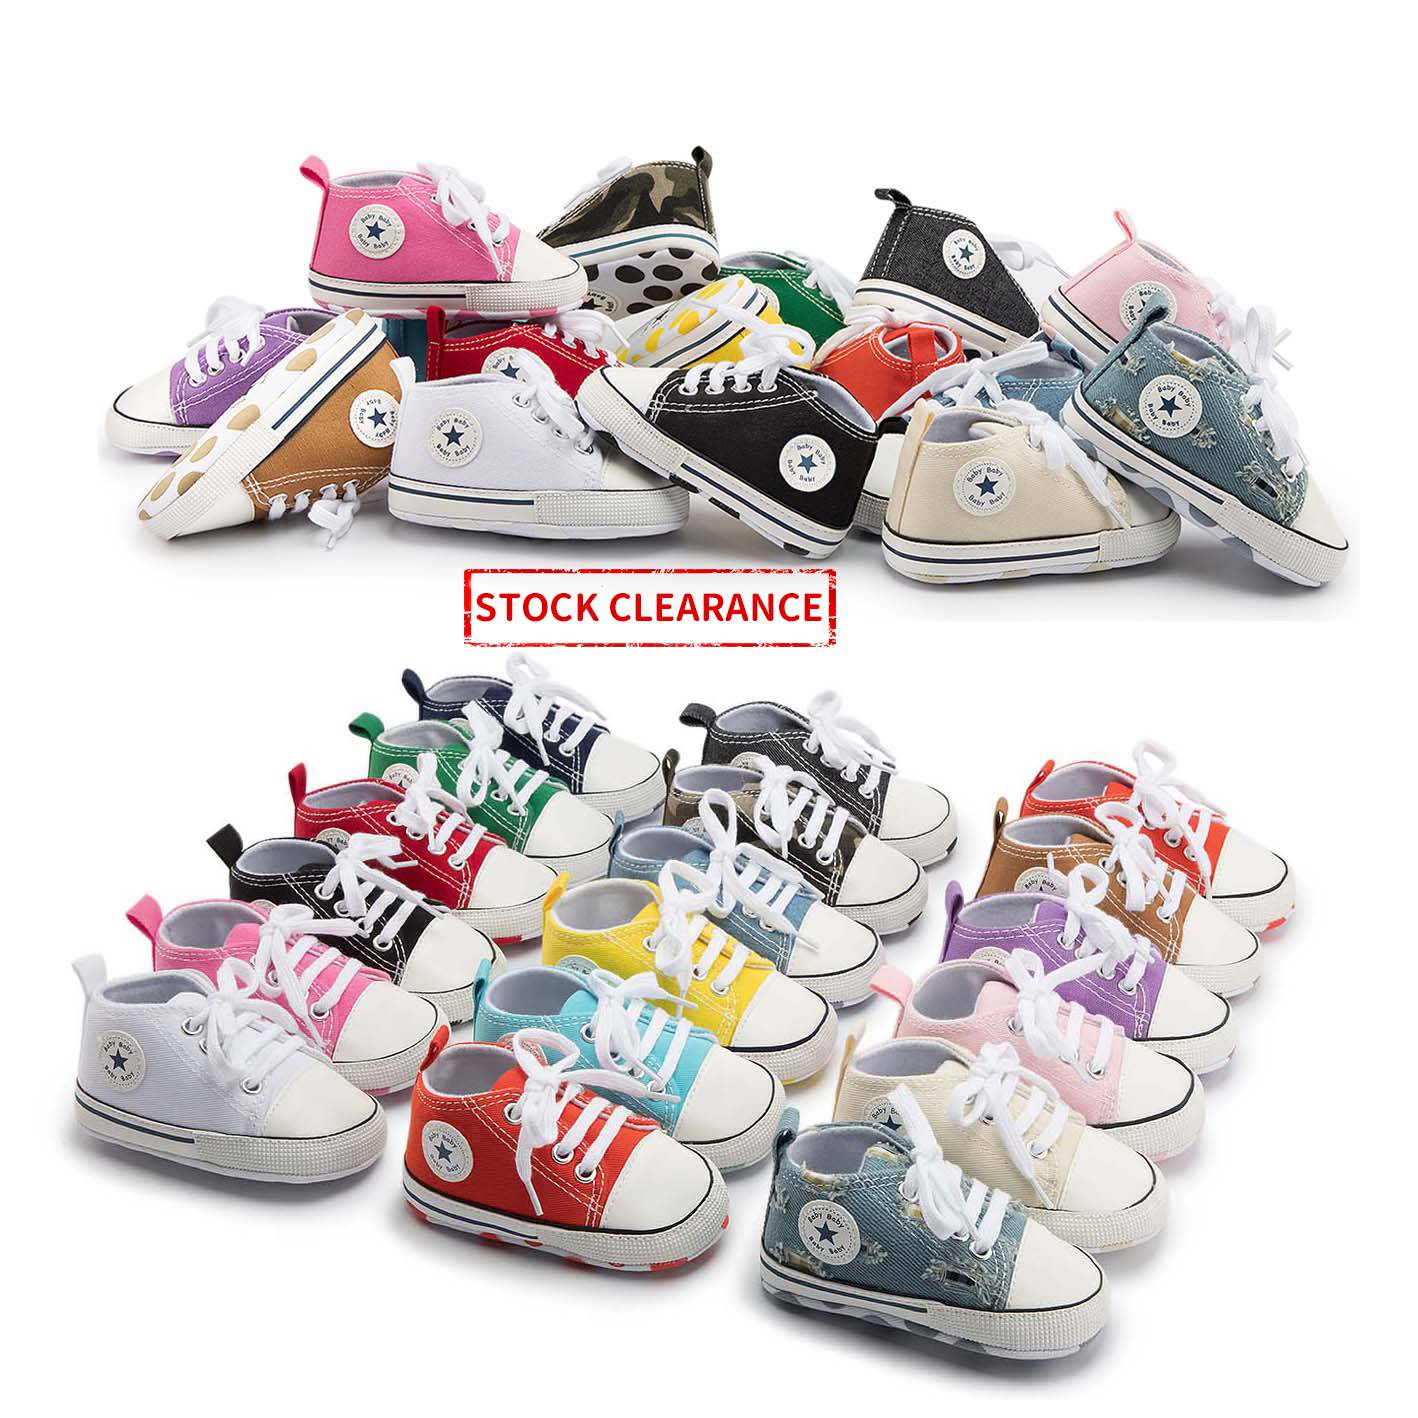 Clearance-baby shoe wholesaler, supplier, and manufacturer